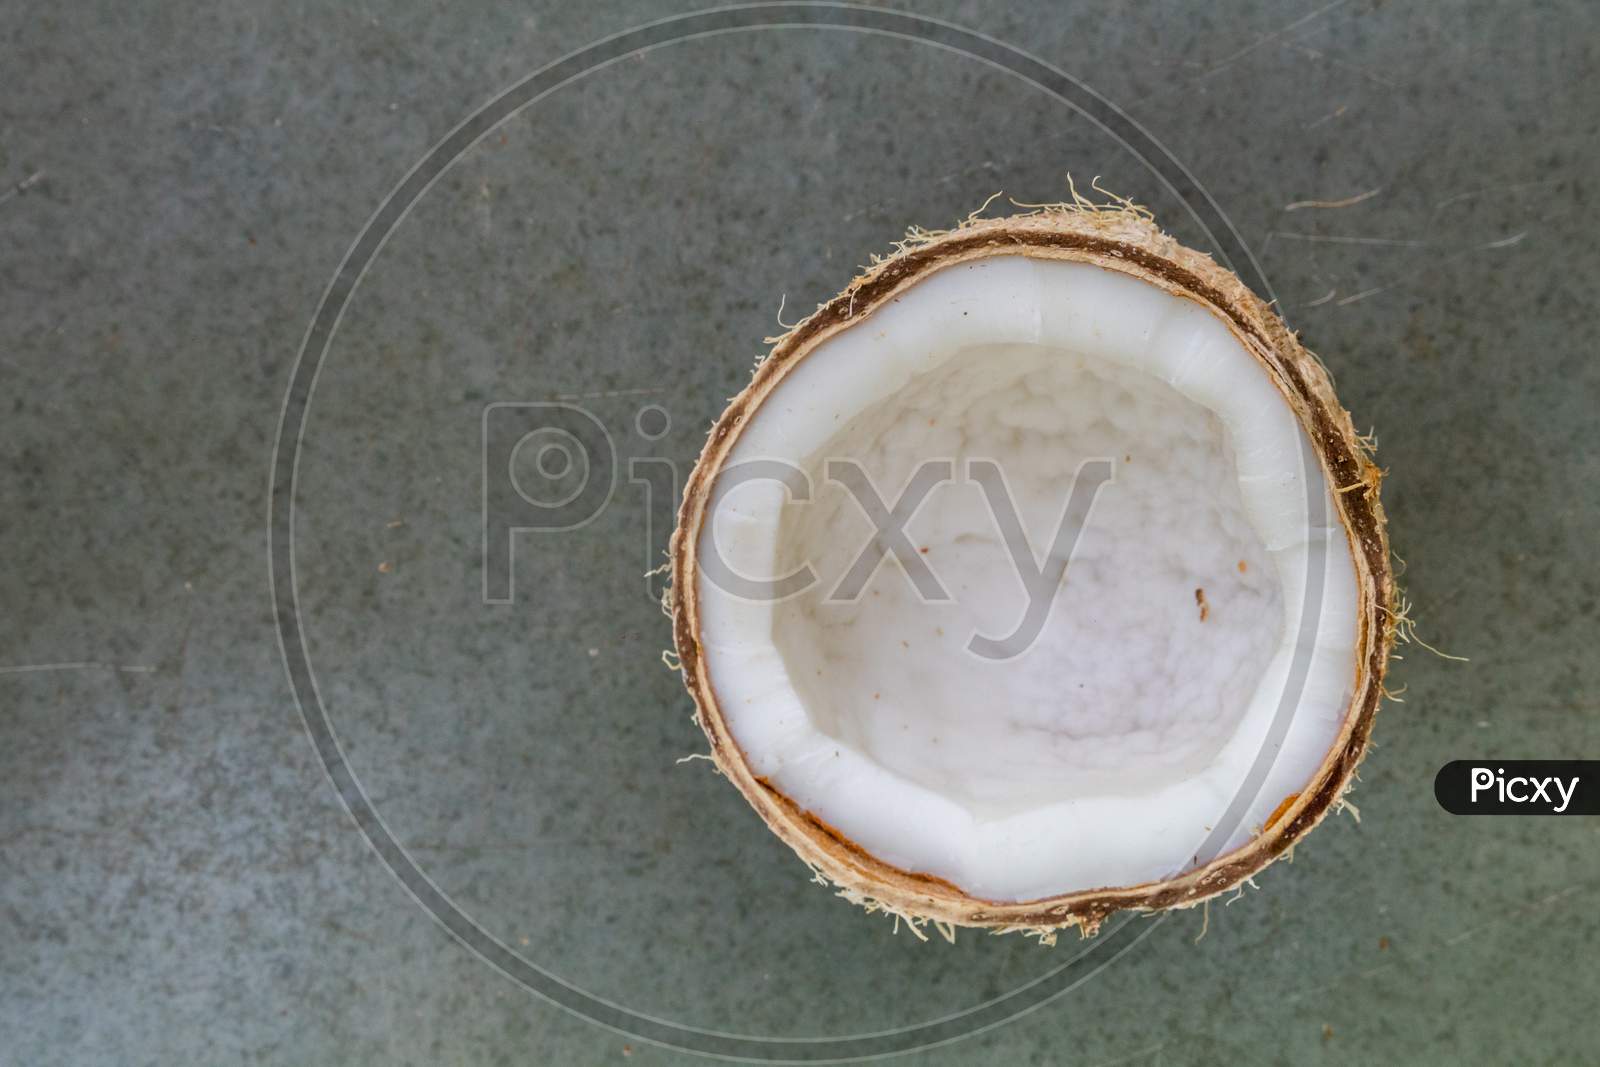 Top View Of A Half Cut Coconut On Plain Background